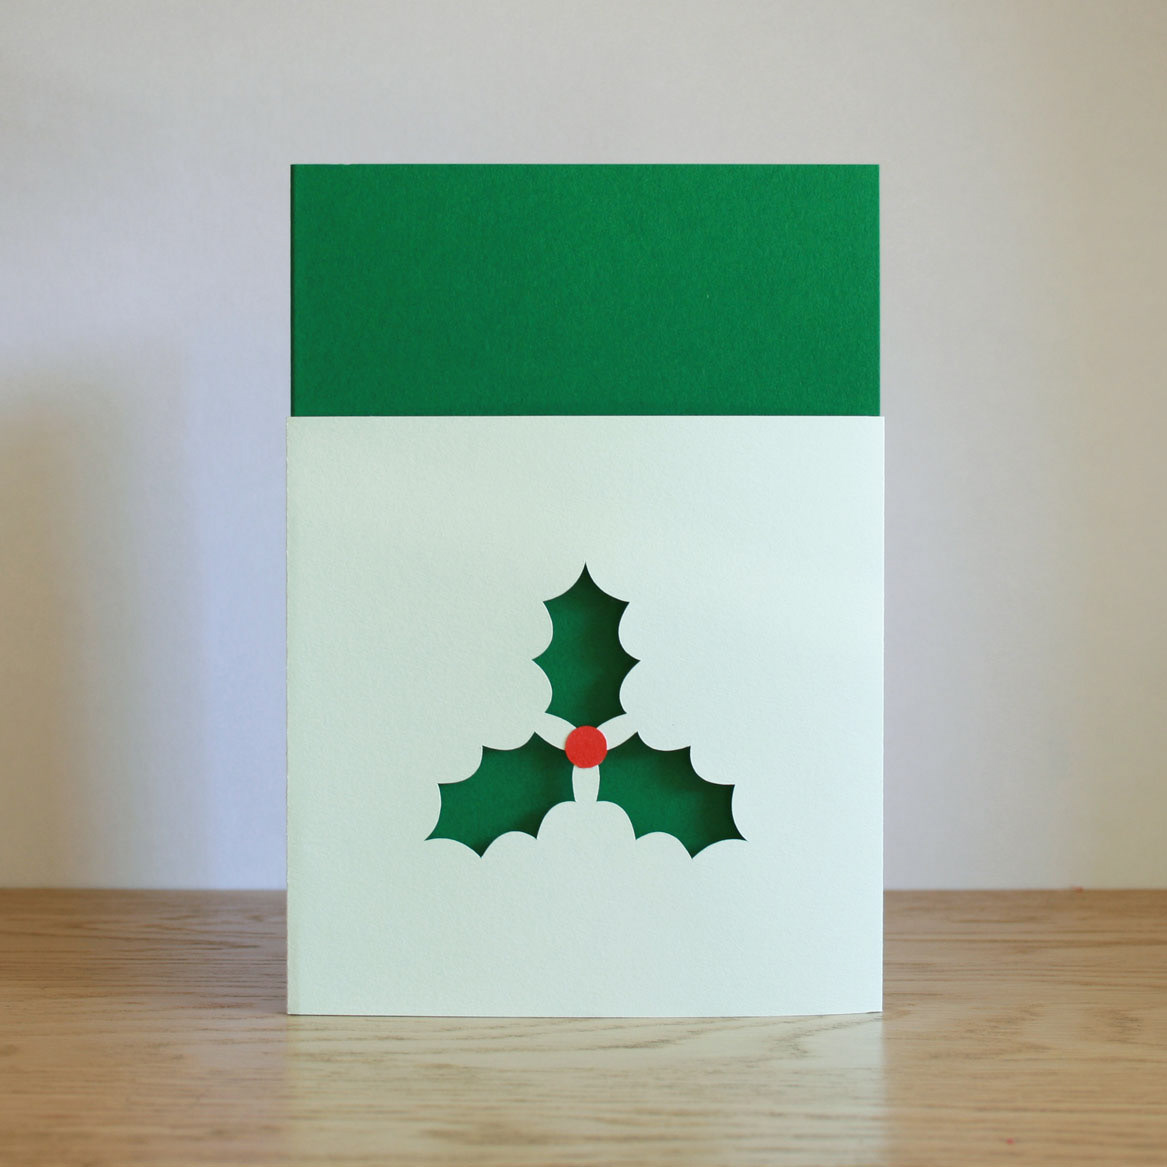 Christmas  paper cut  Holly  snowflake  candle  robin  tree